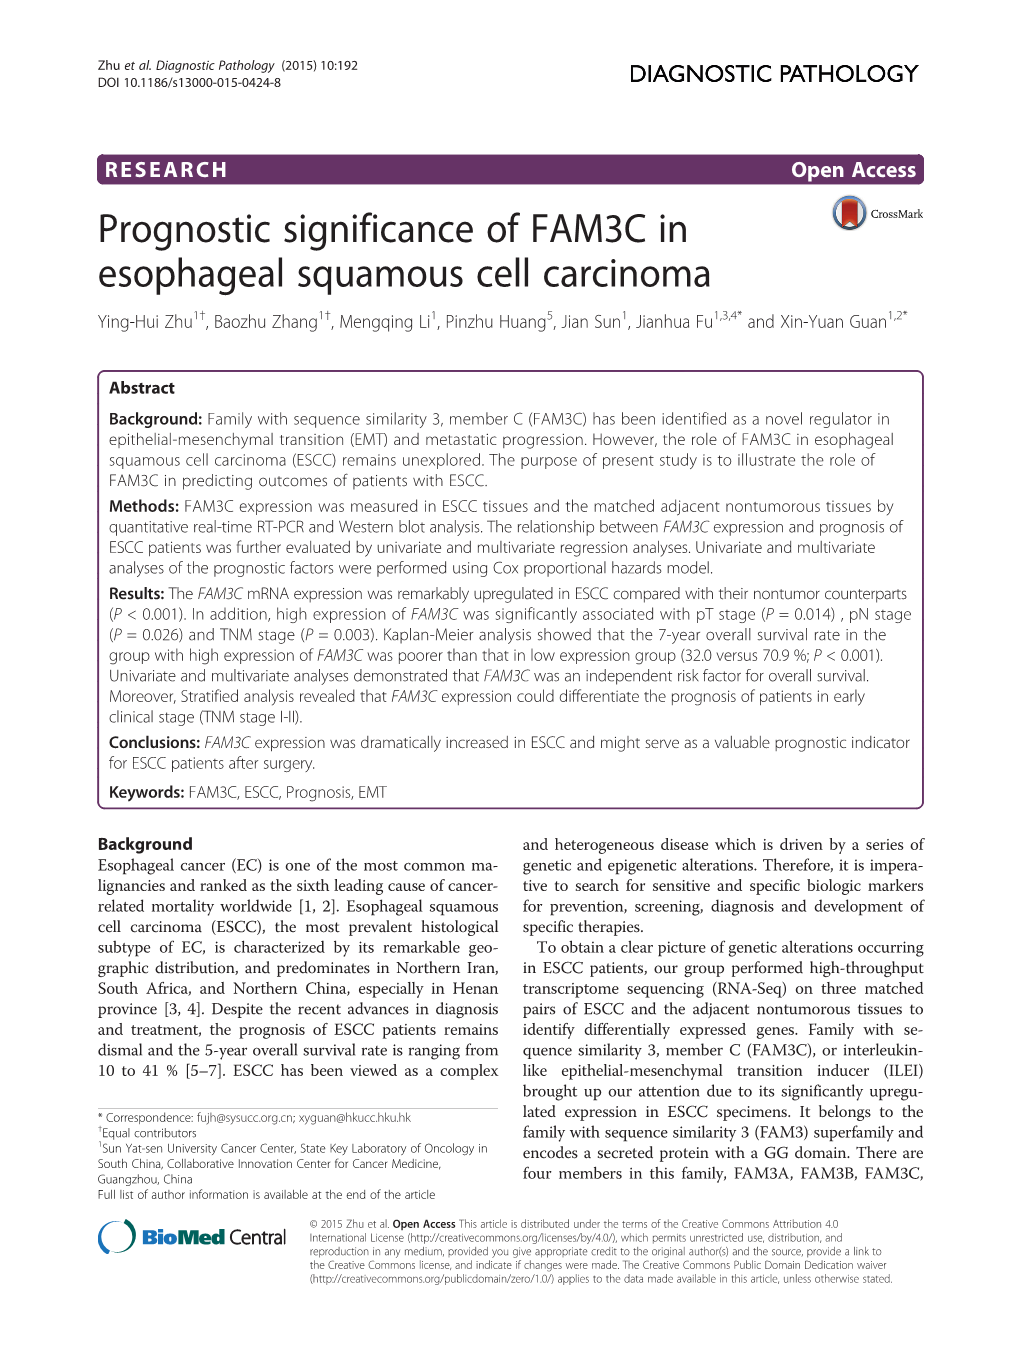 Prognostic Significance of FAM3C in Esophageal Squamous Cell Carcinoma